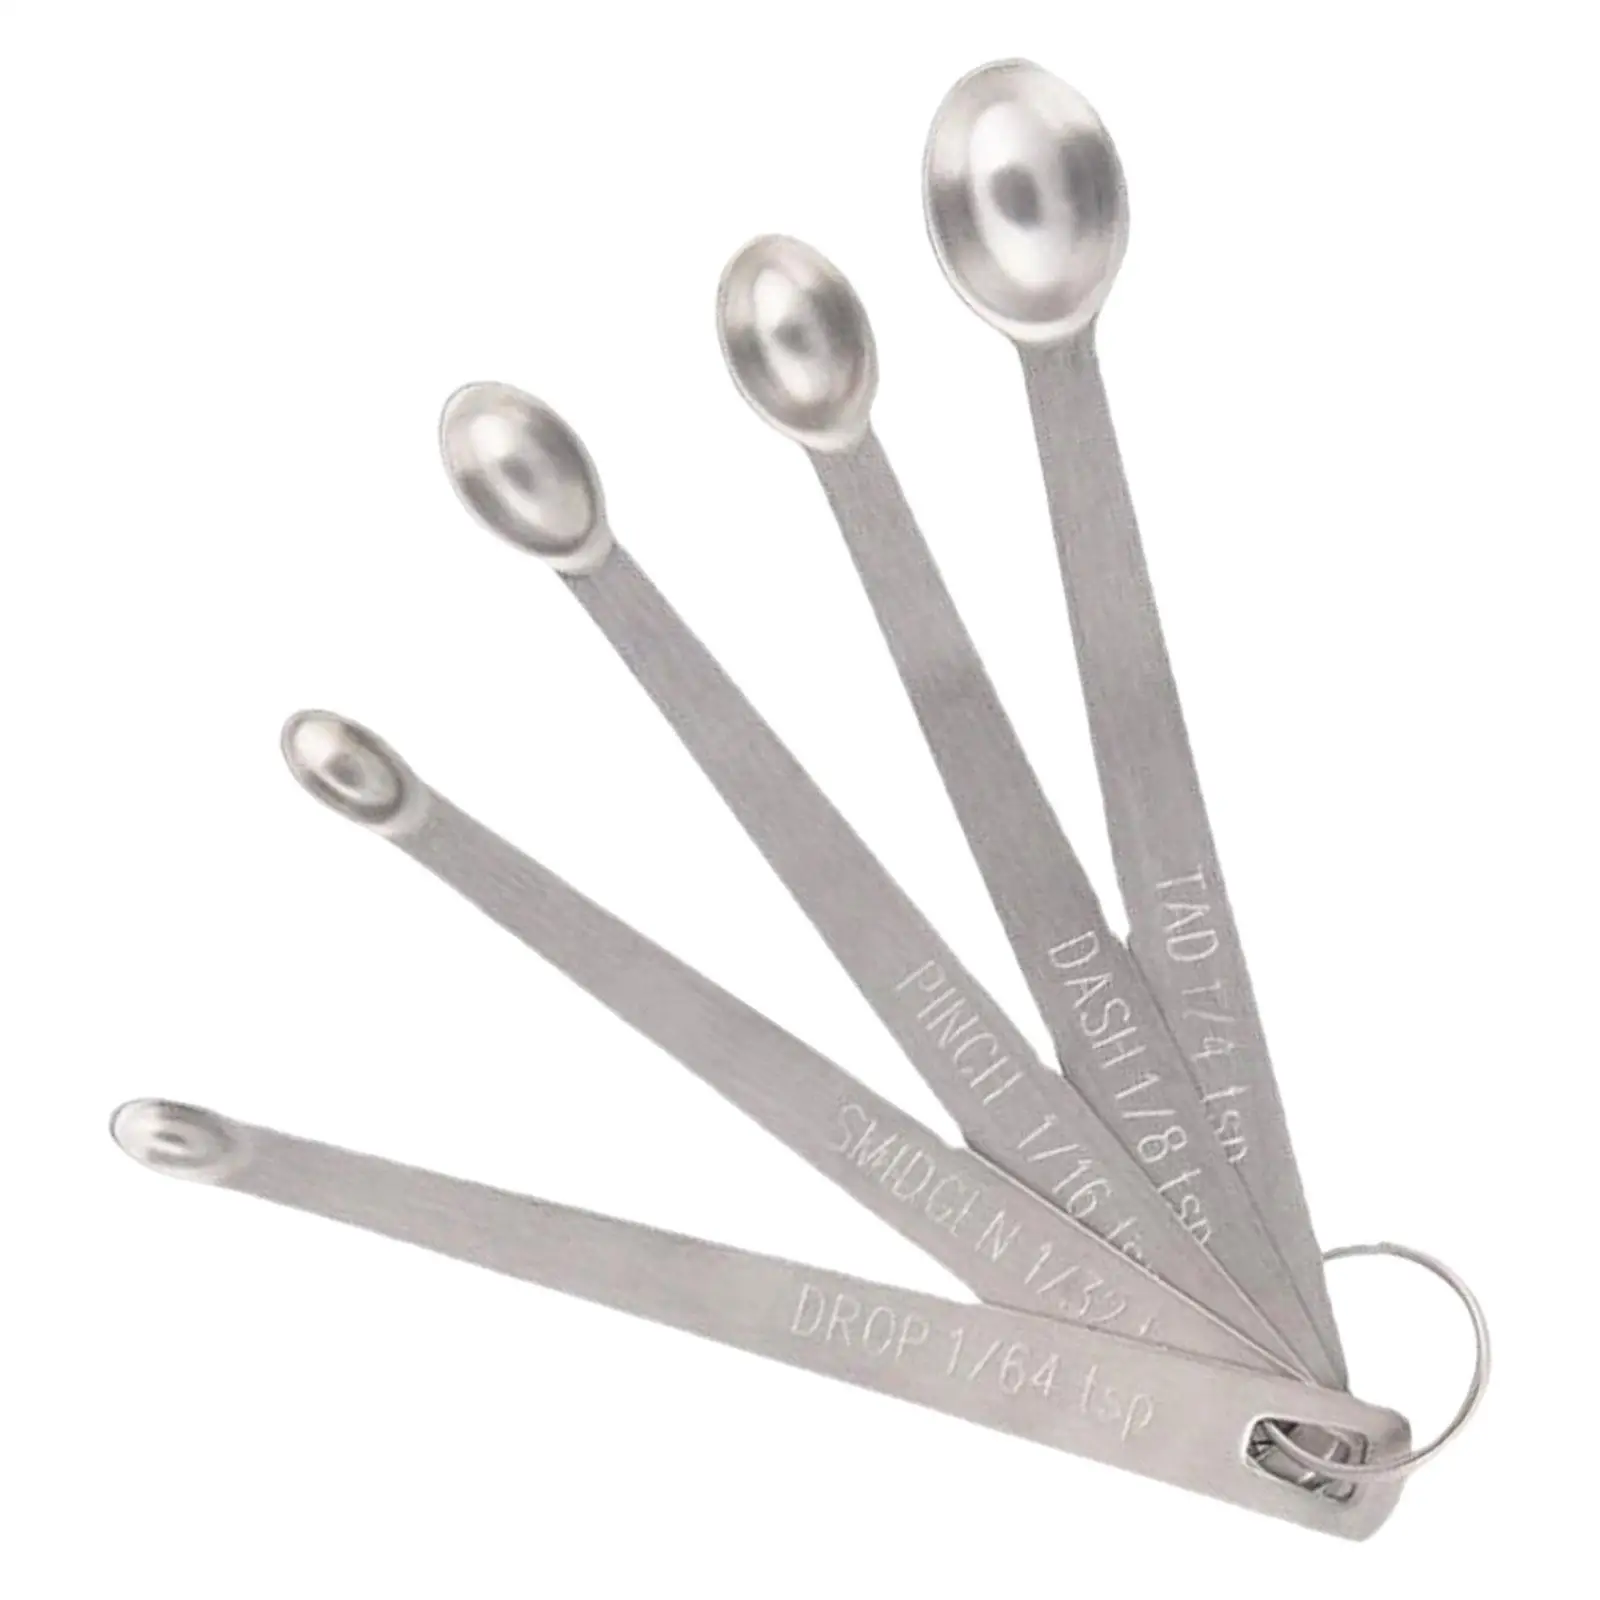 5 Pieces Ingredients Spoon for Dry and Liquid Measuring Spoons